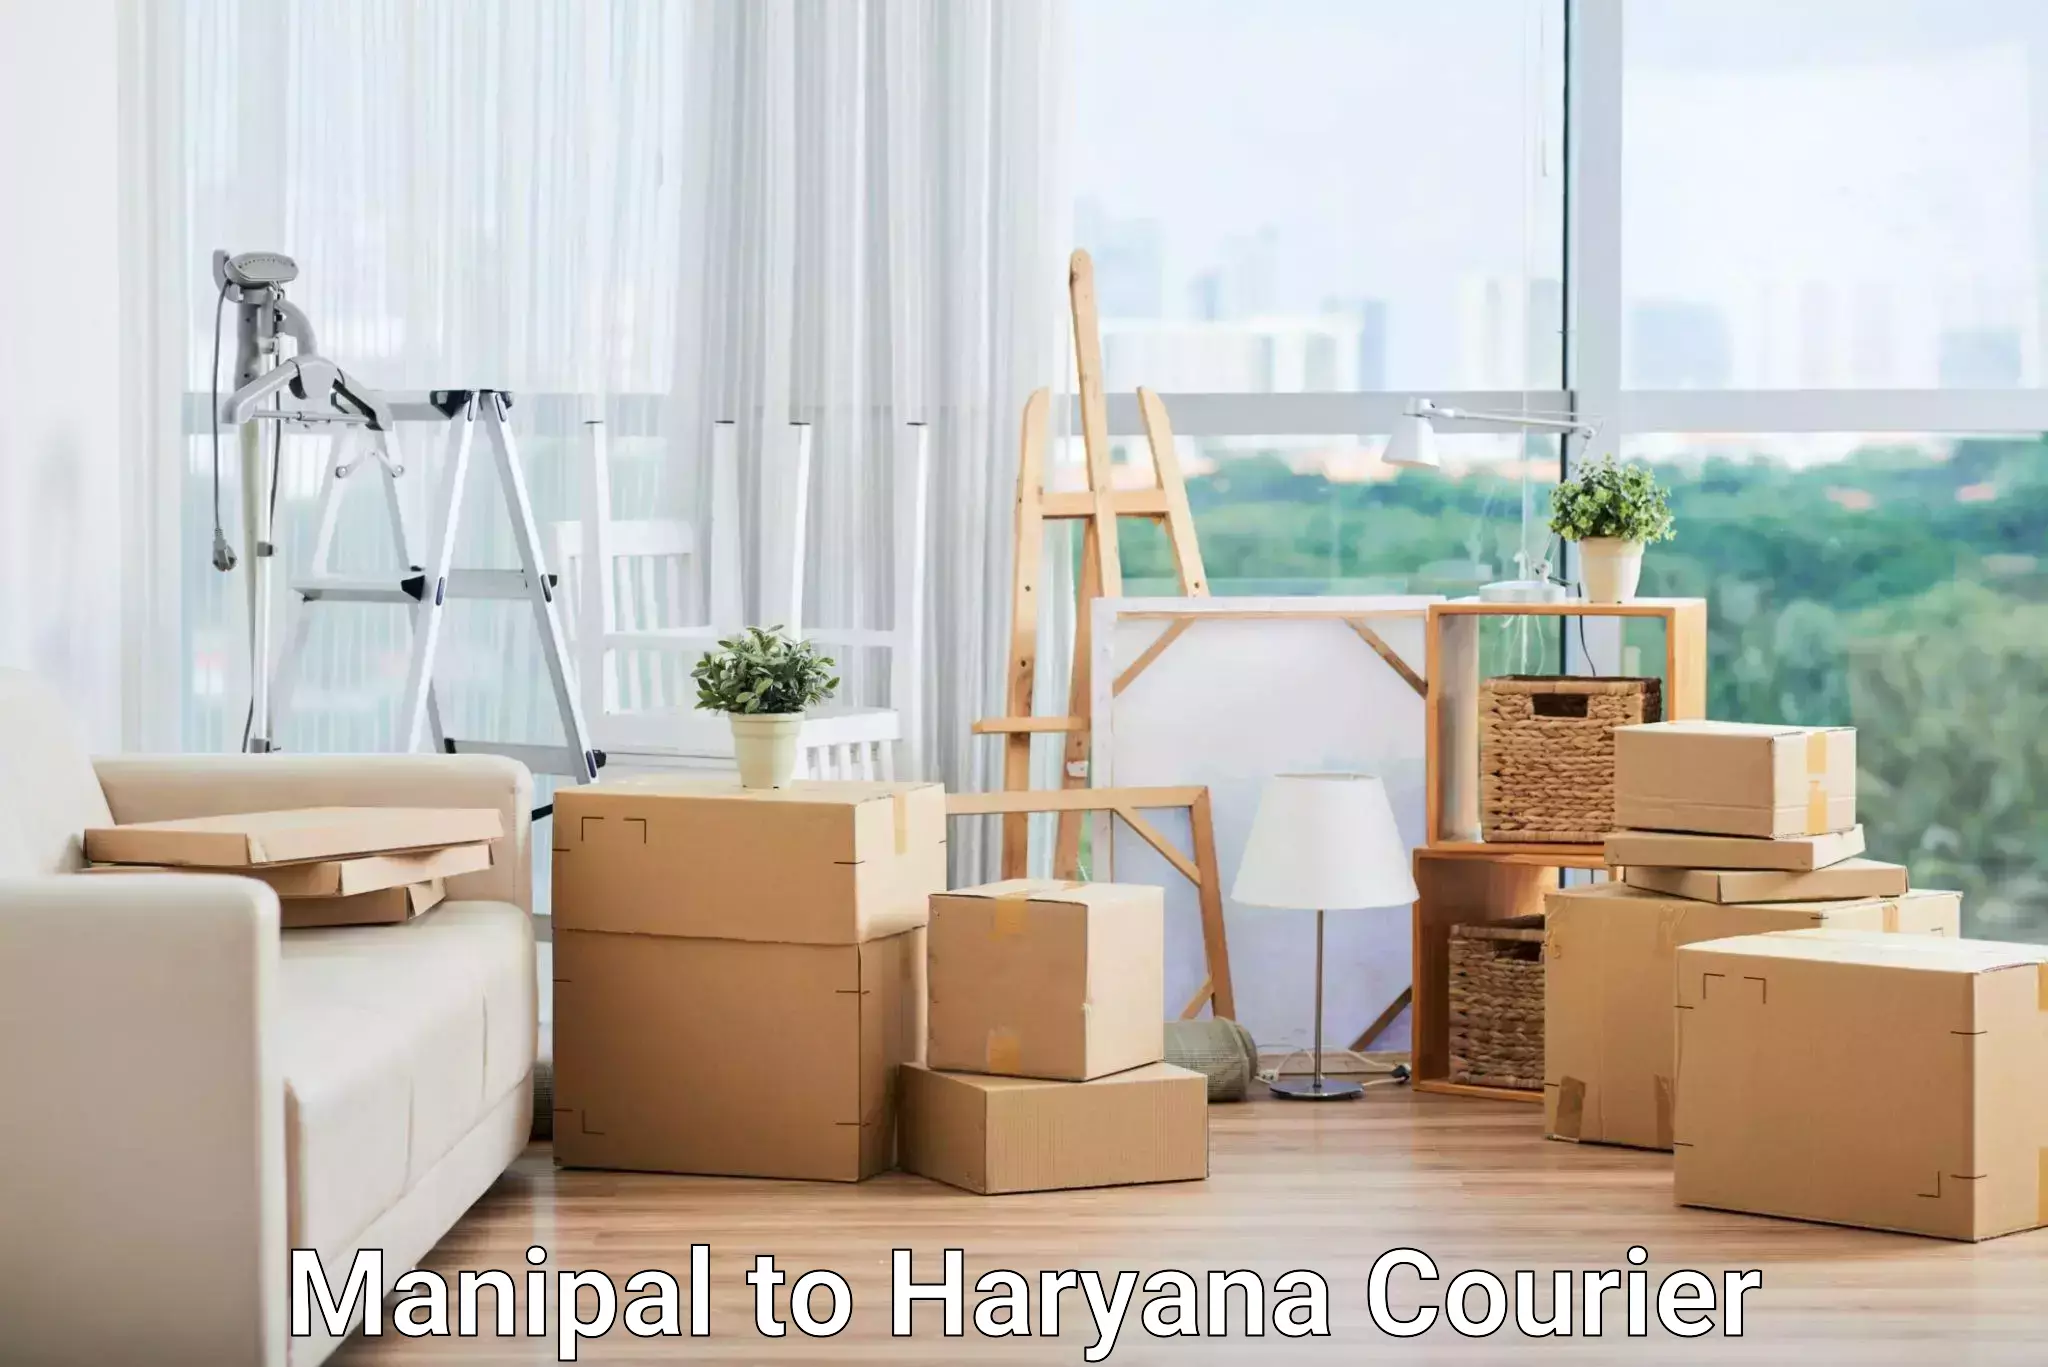 User-friendly courier app Manipal to Haryana